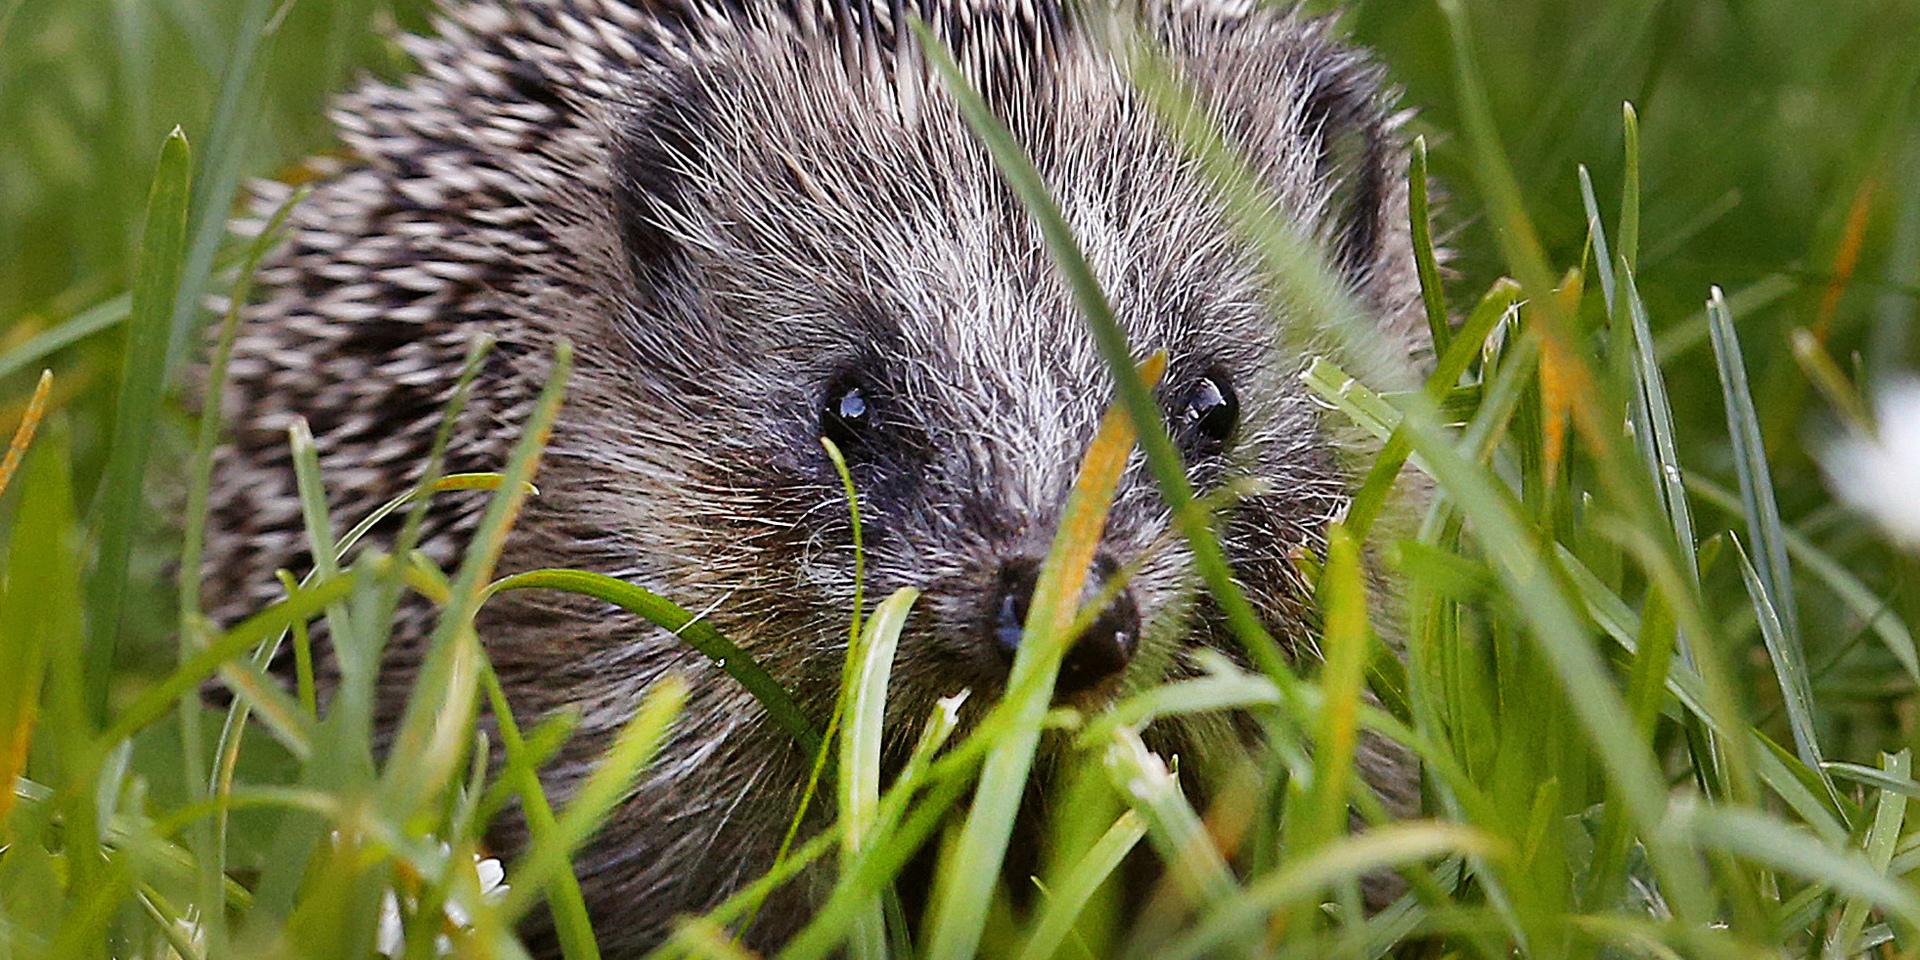 A hedgehog baby walks in the green grass and looks up on a meadow in Frankfurt, Germany, Wednesday, Sept. 27, 2017. (AP Photo/Michael Probst)